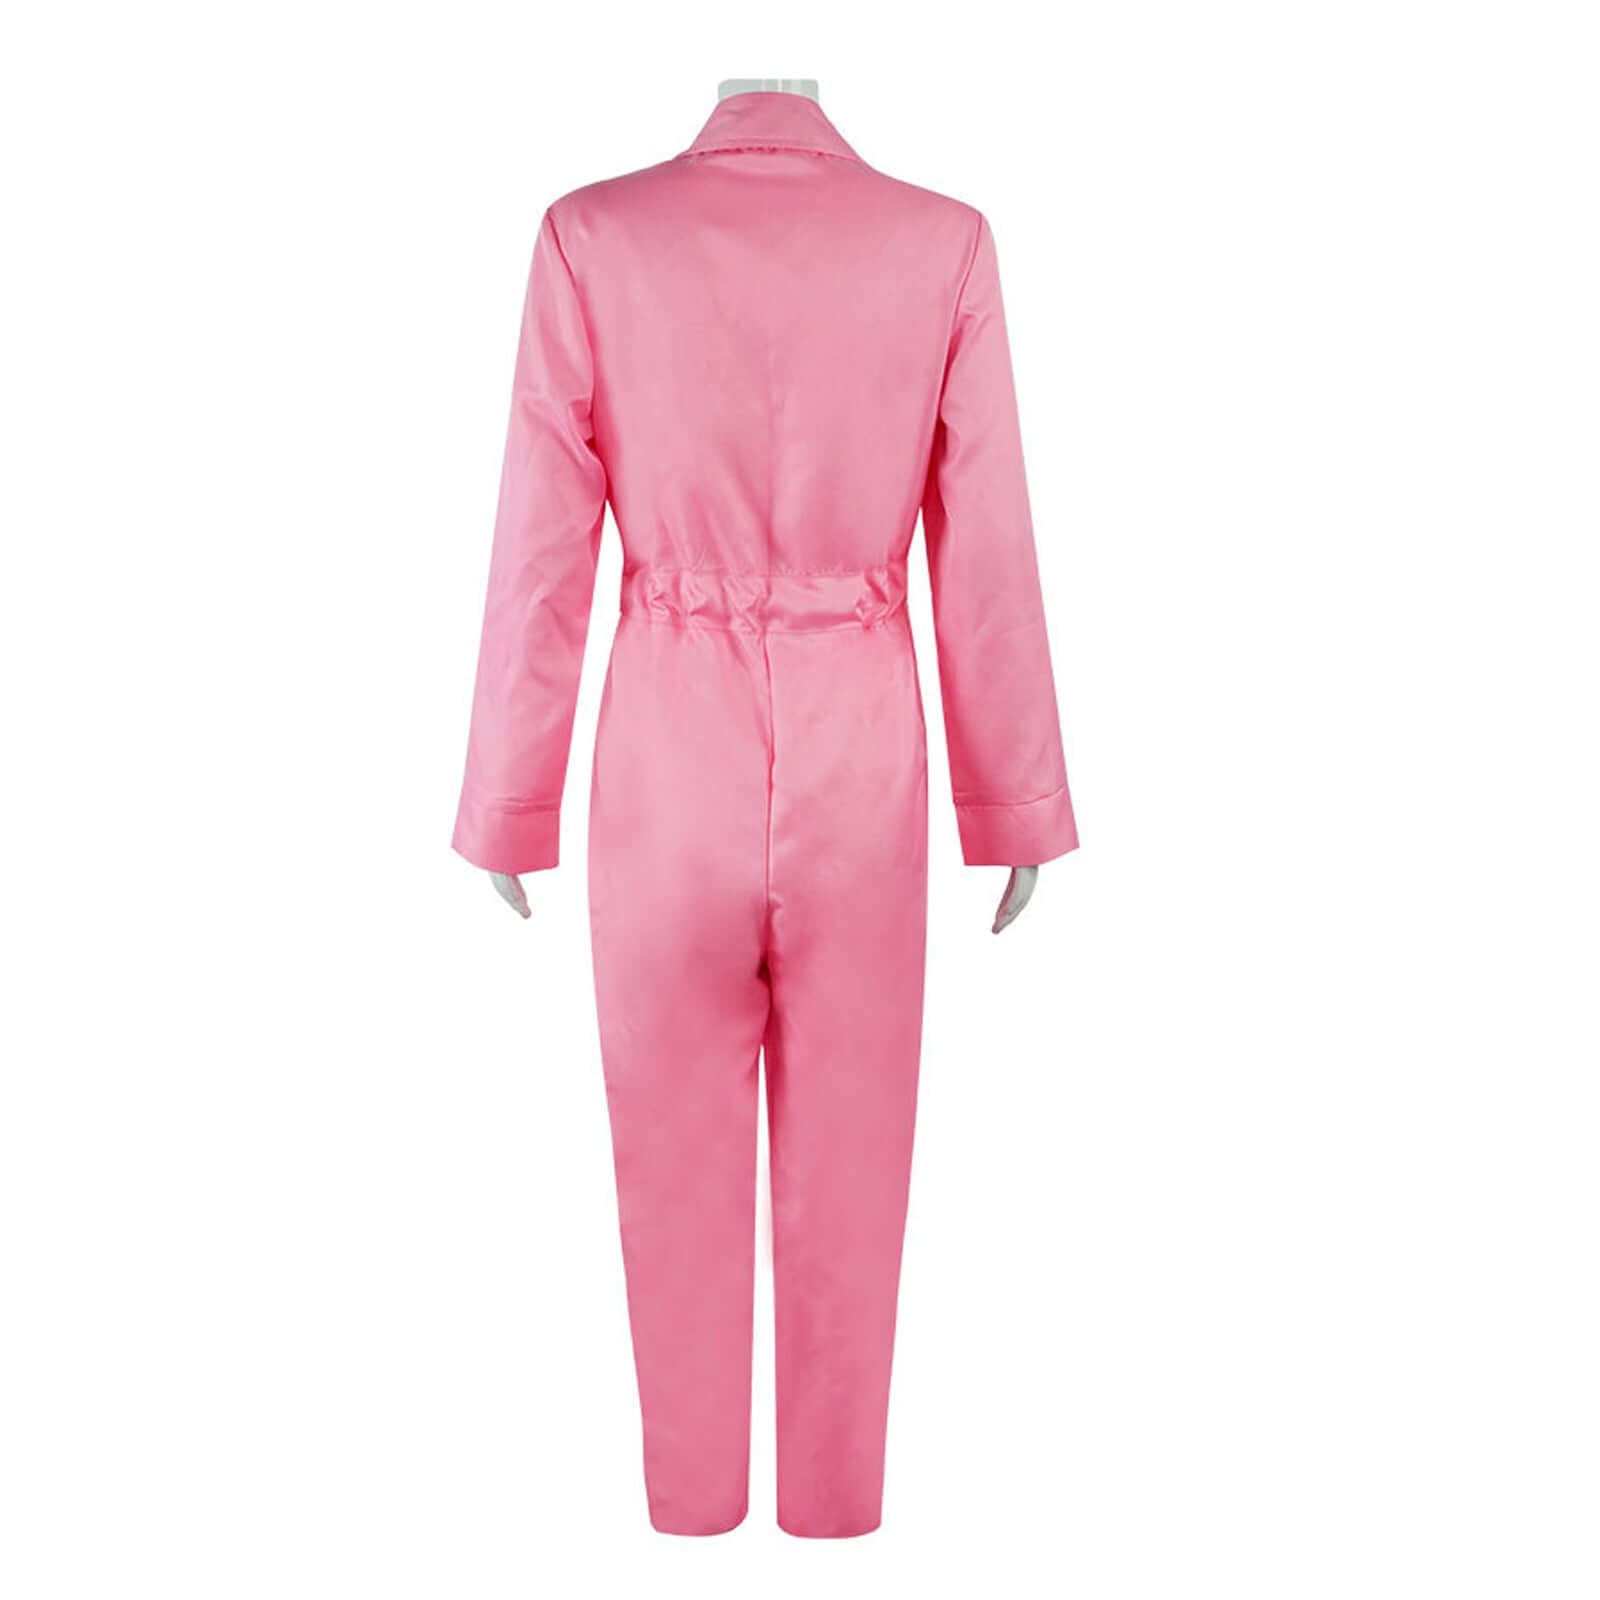 Pink Jumpsuit Kids Adults Movie Costume Button Down Lapel Belted Cosplay Outfit